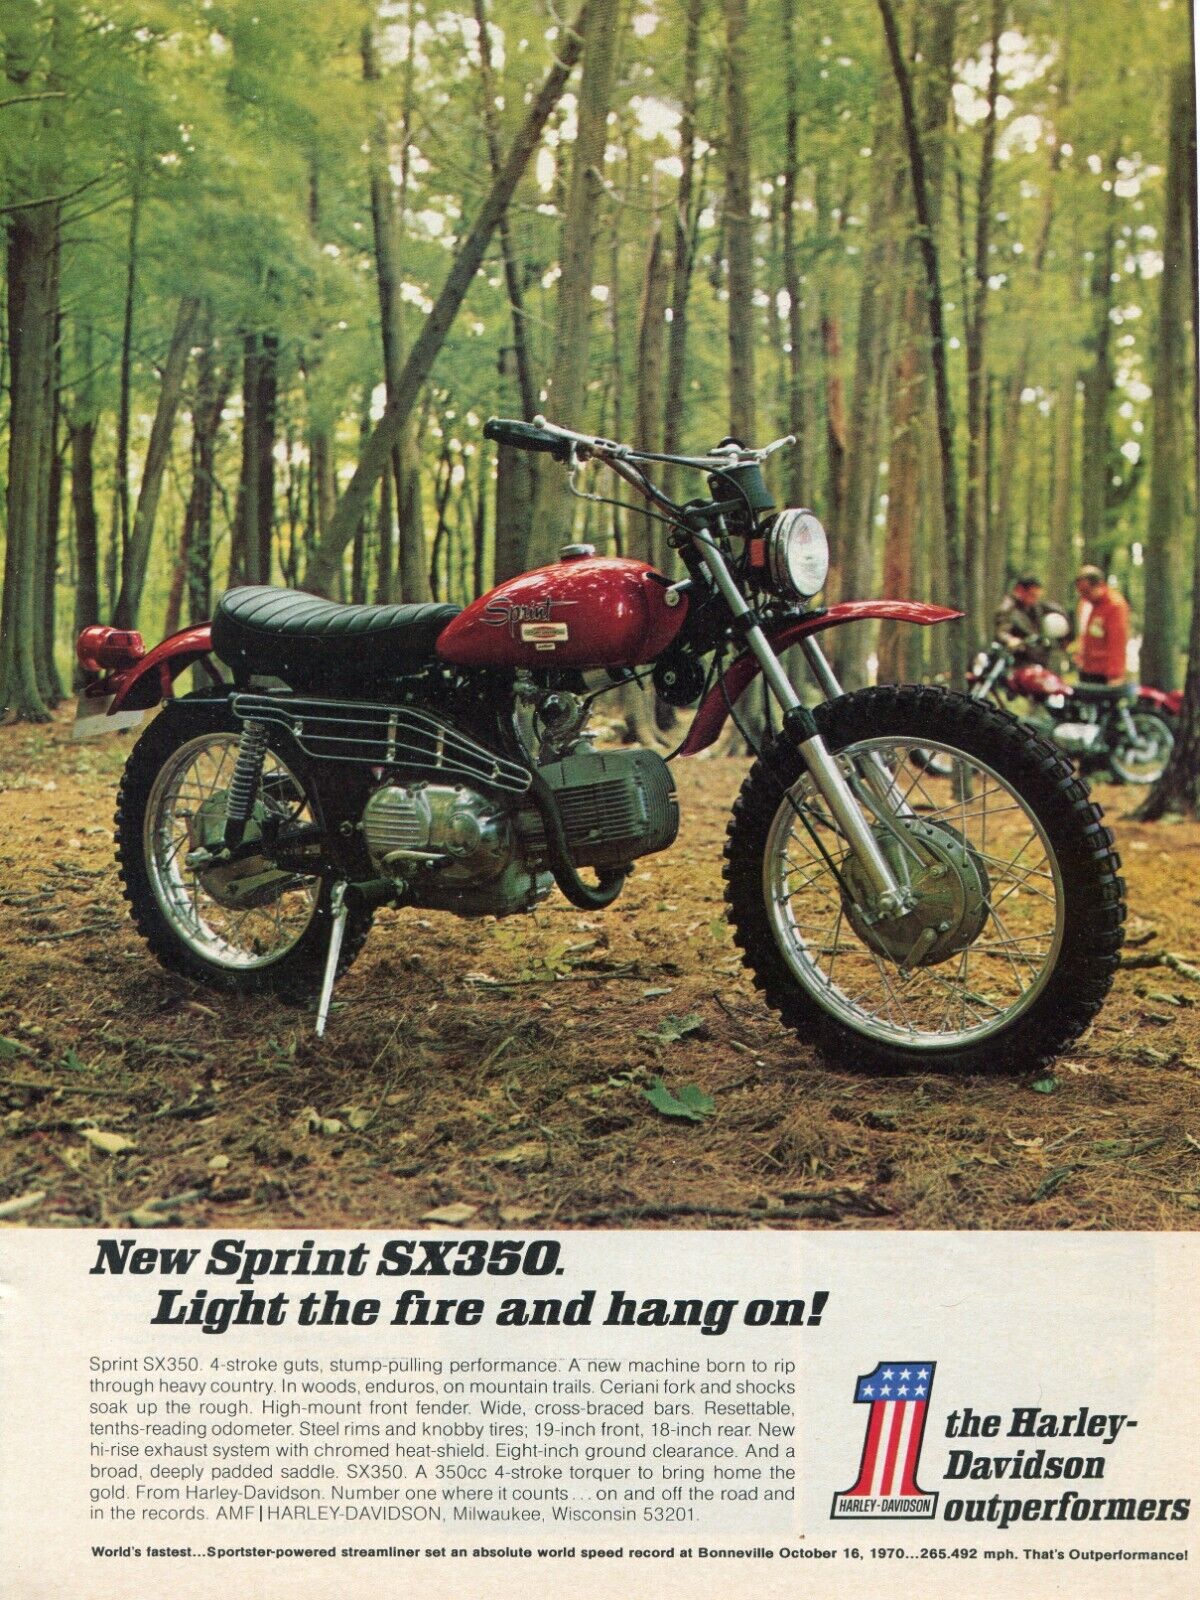 1971 Print Ad of AMF Harley Davidson Sprint SX350 Motorcycle light the fire